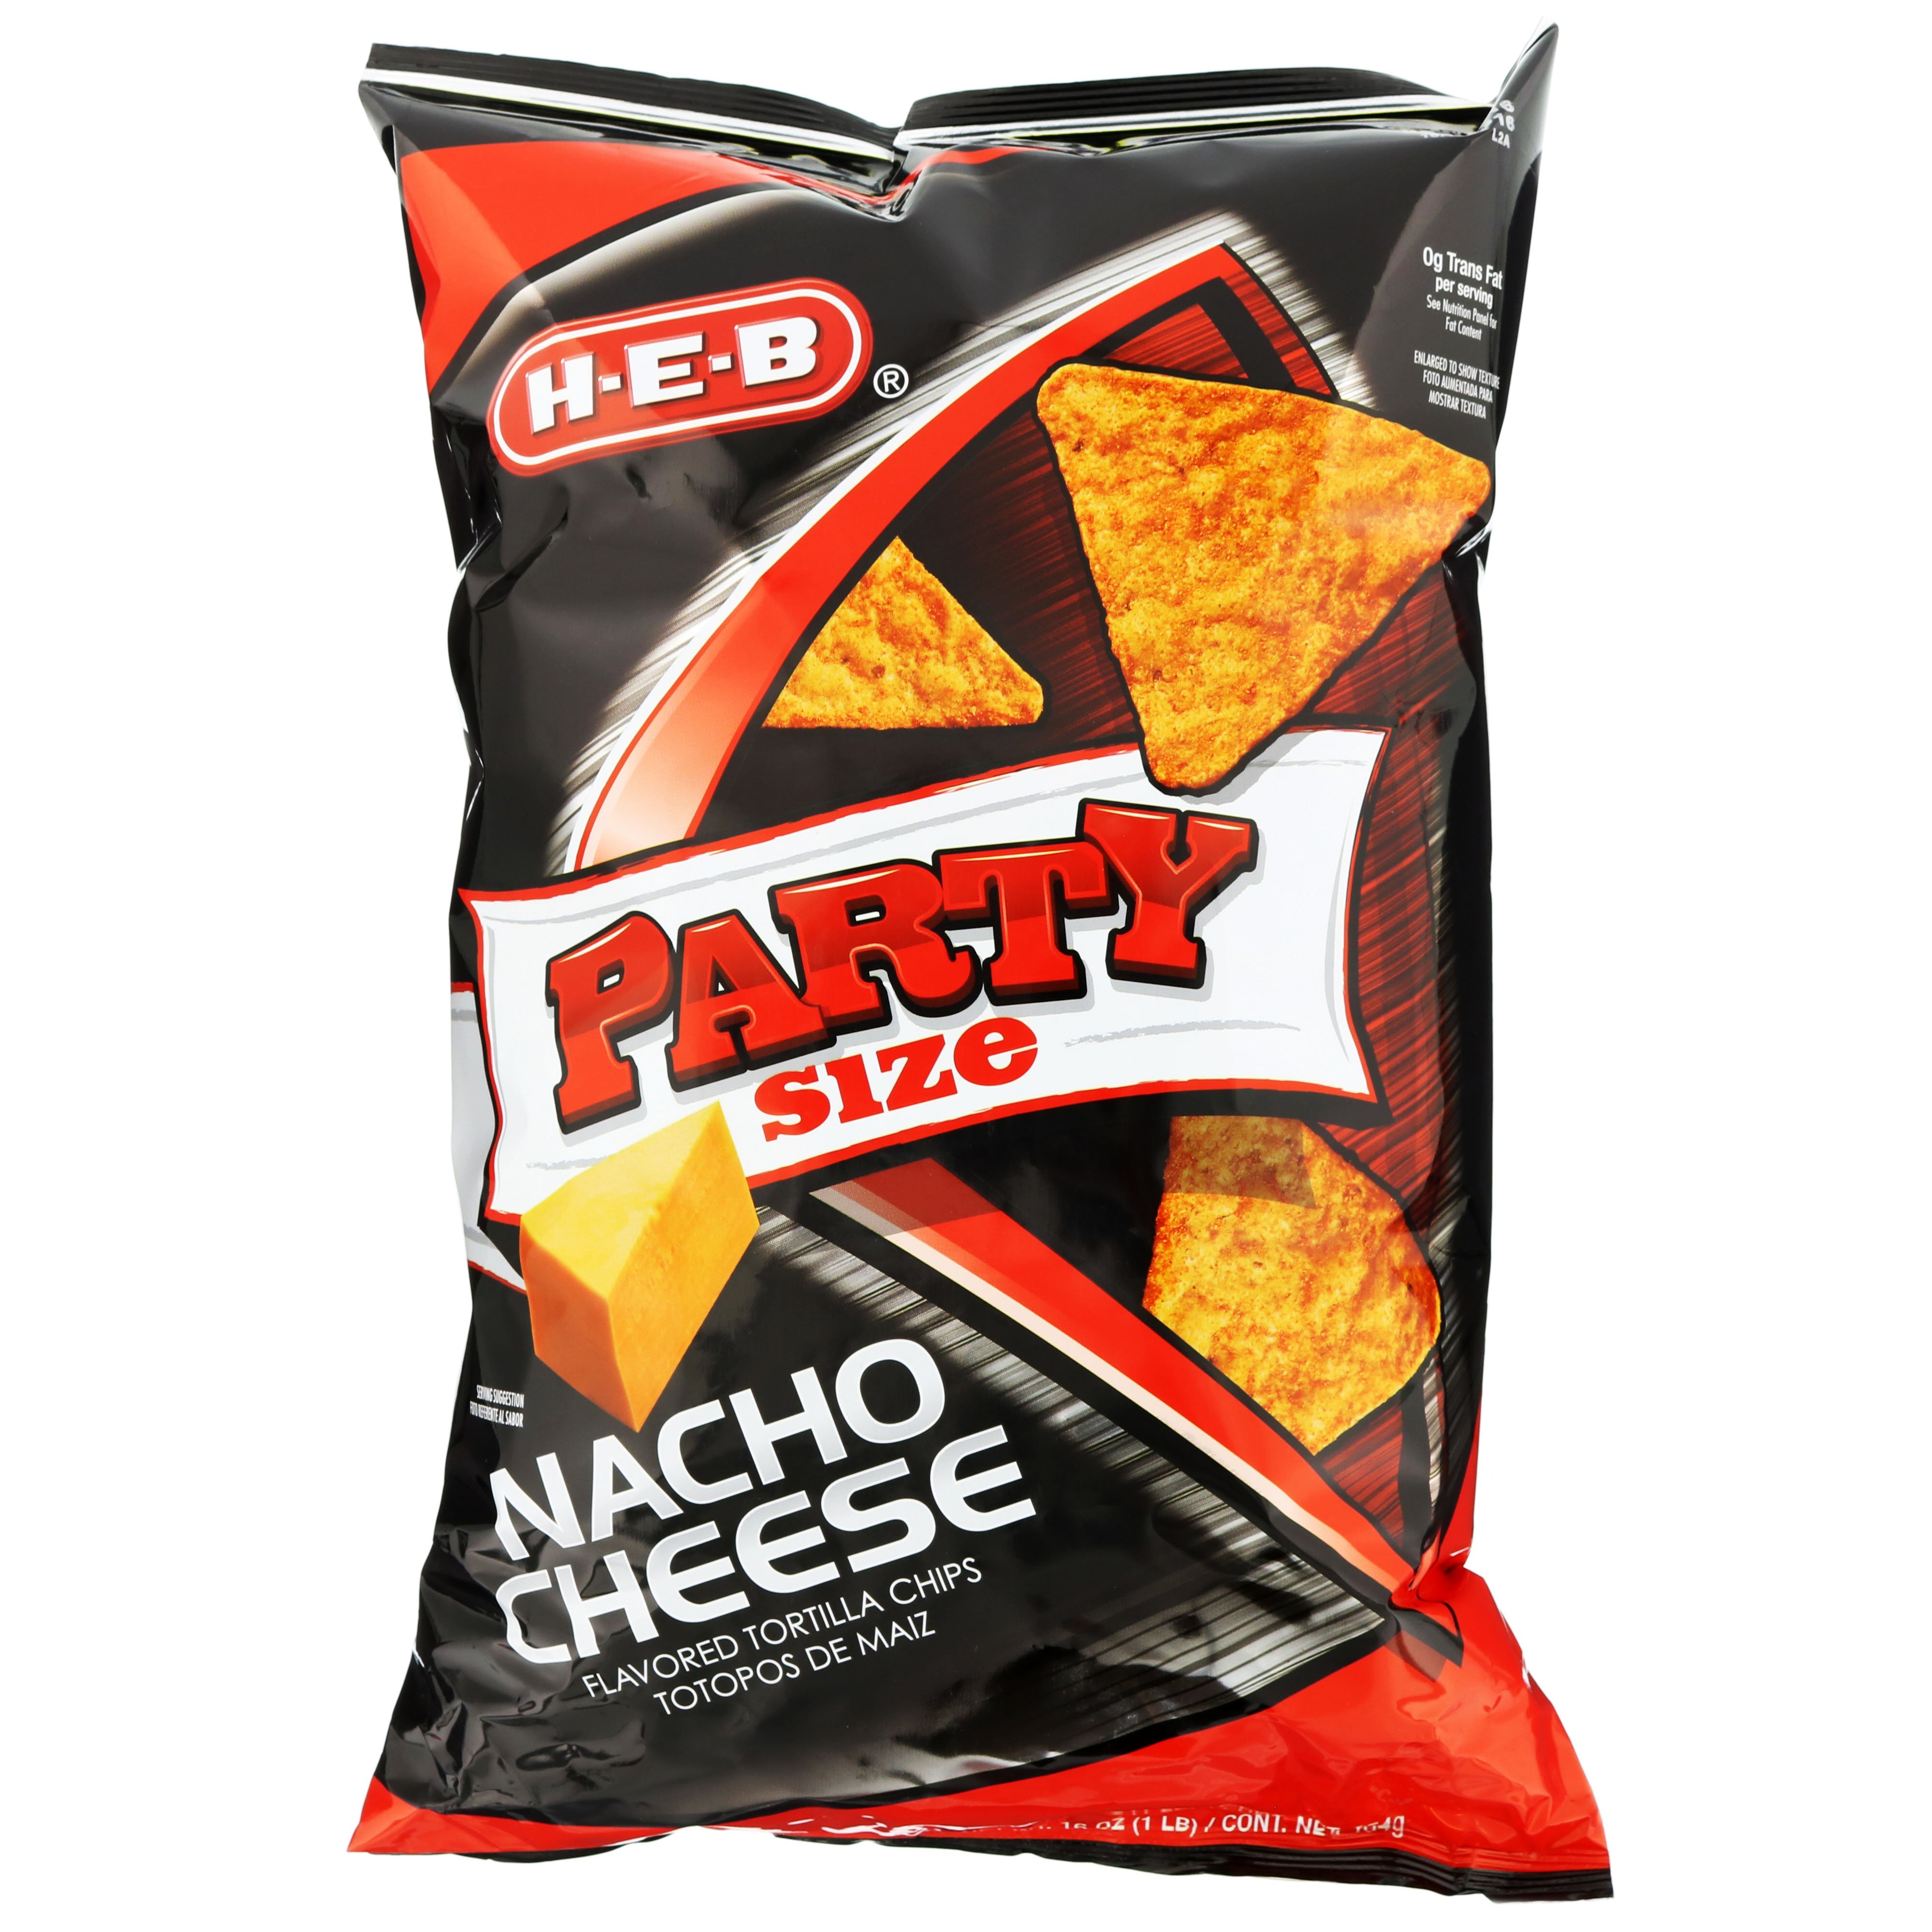 General Mills Chex Mix Bold Party Blend - Shop Chips at H-E-B